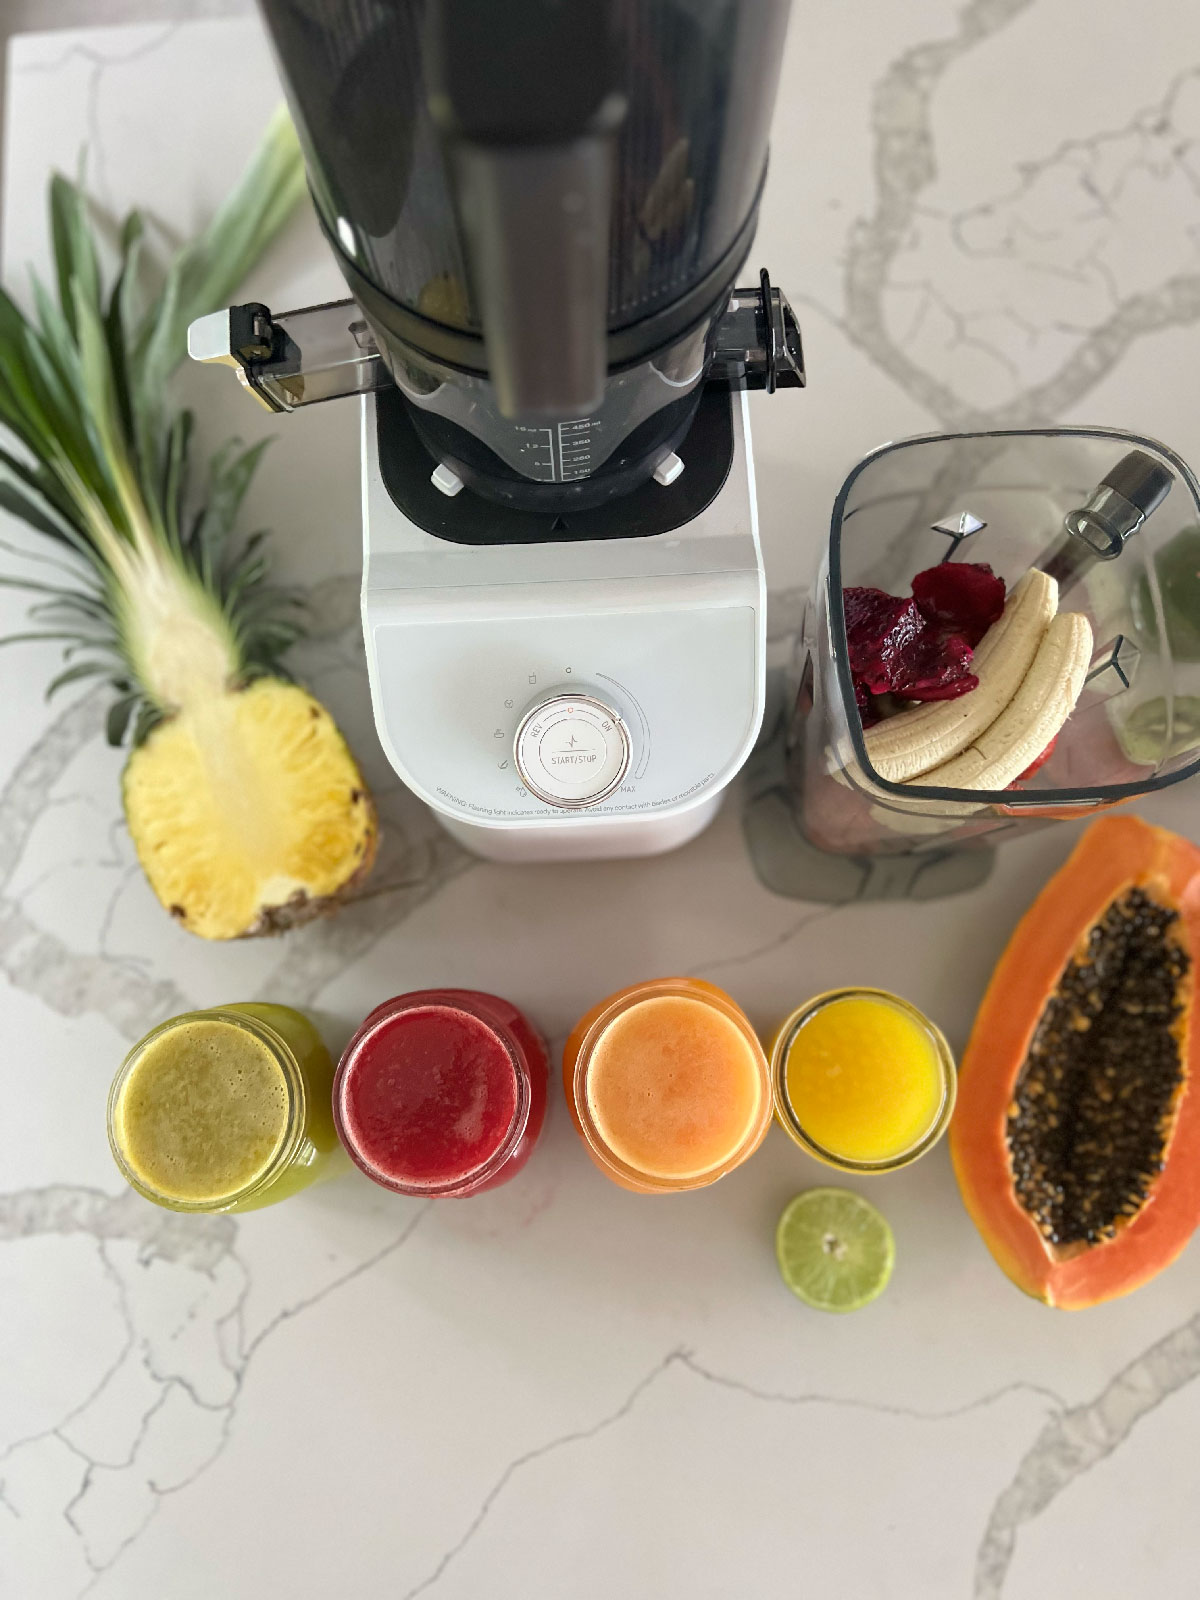 NEW Nama C2 Juicer + Blender Combo Review - Is It The Best Value? 